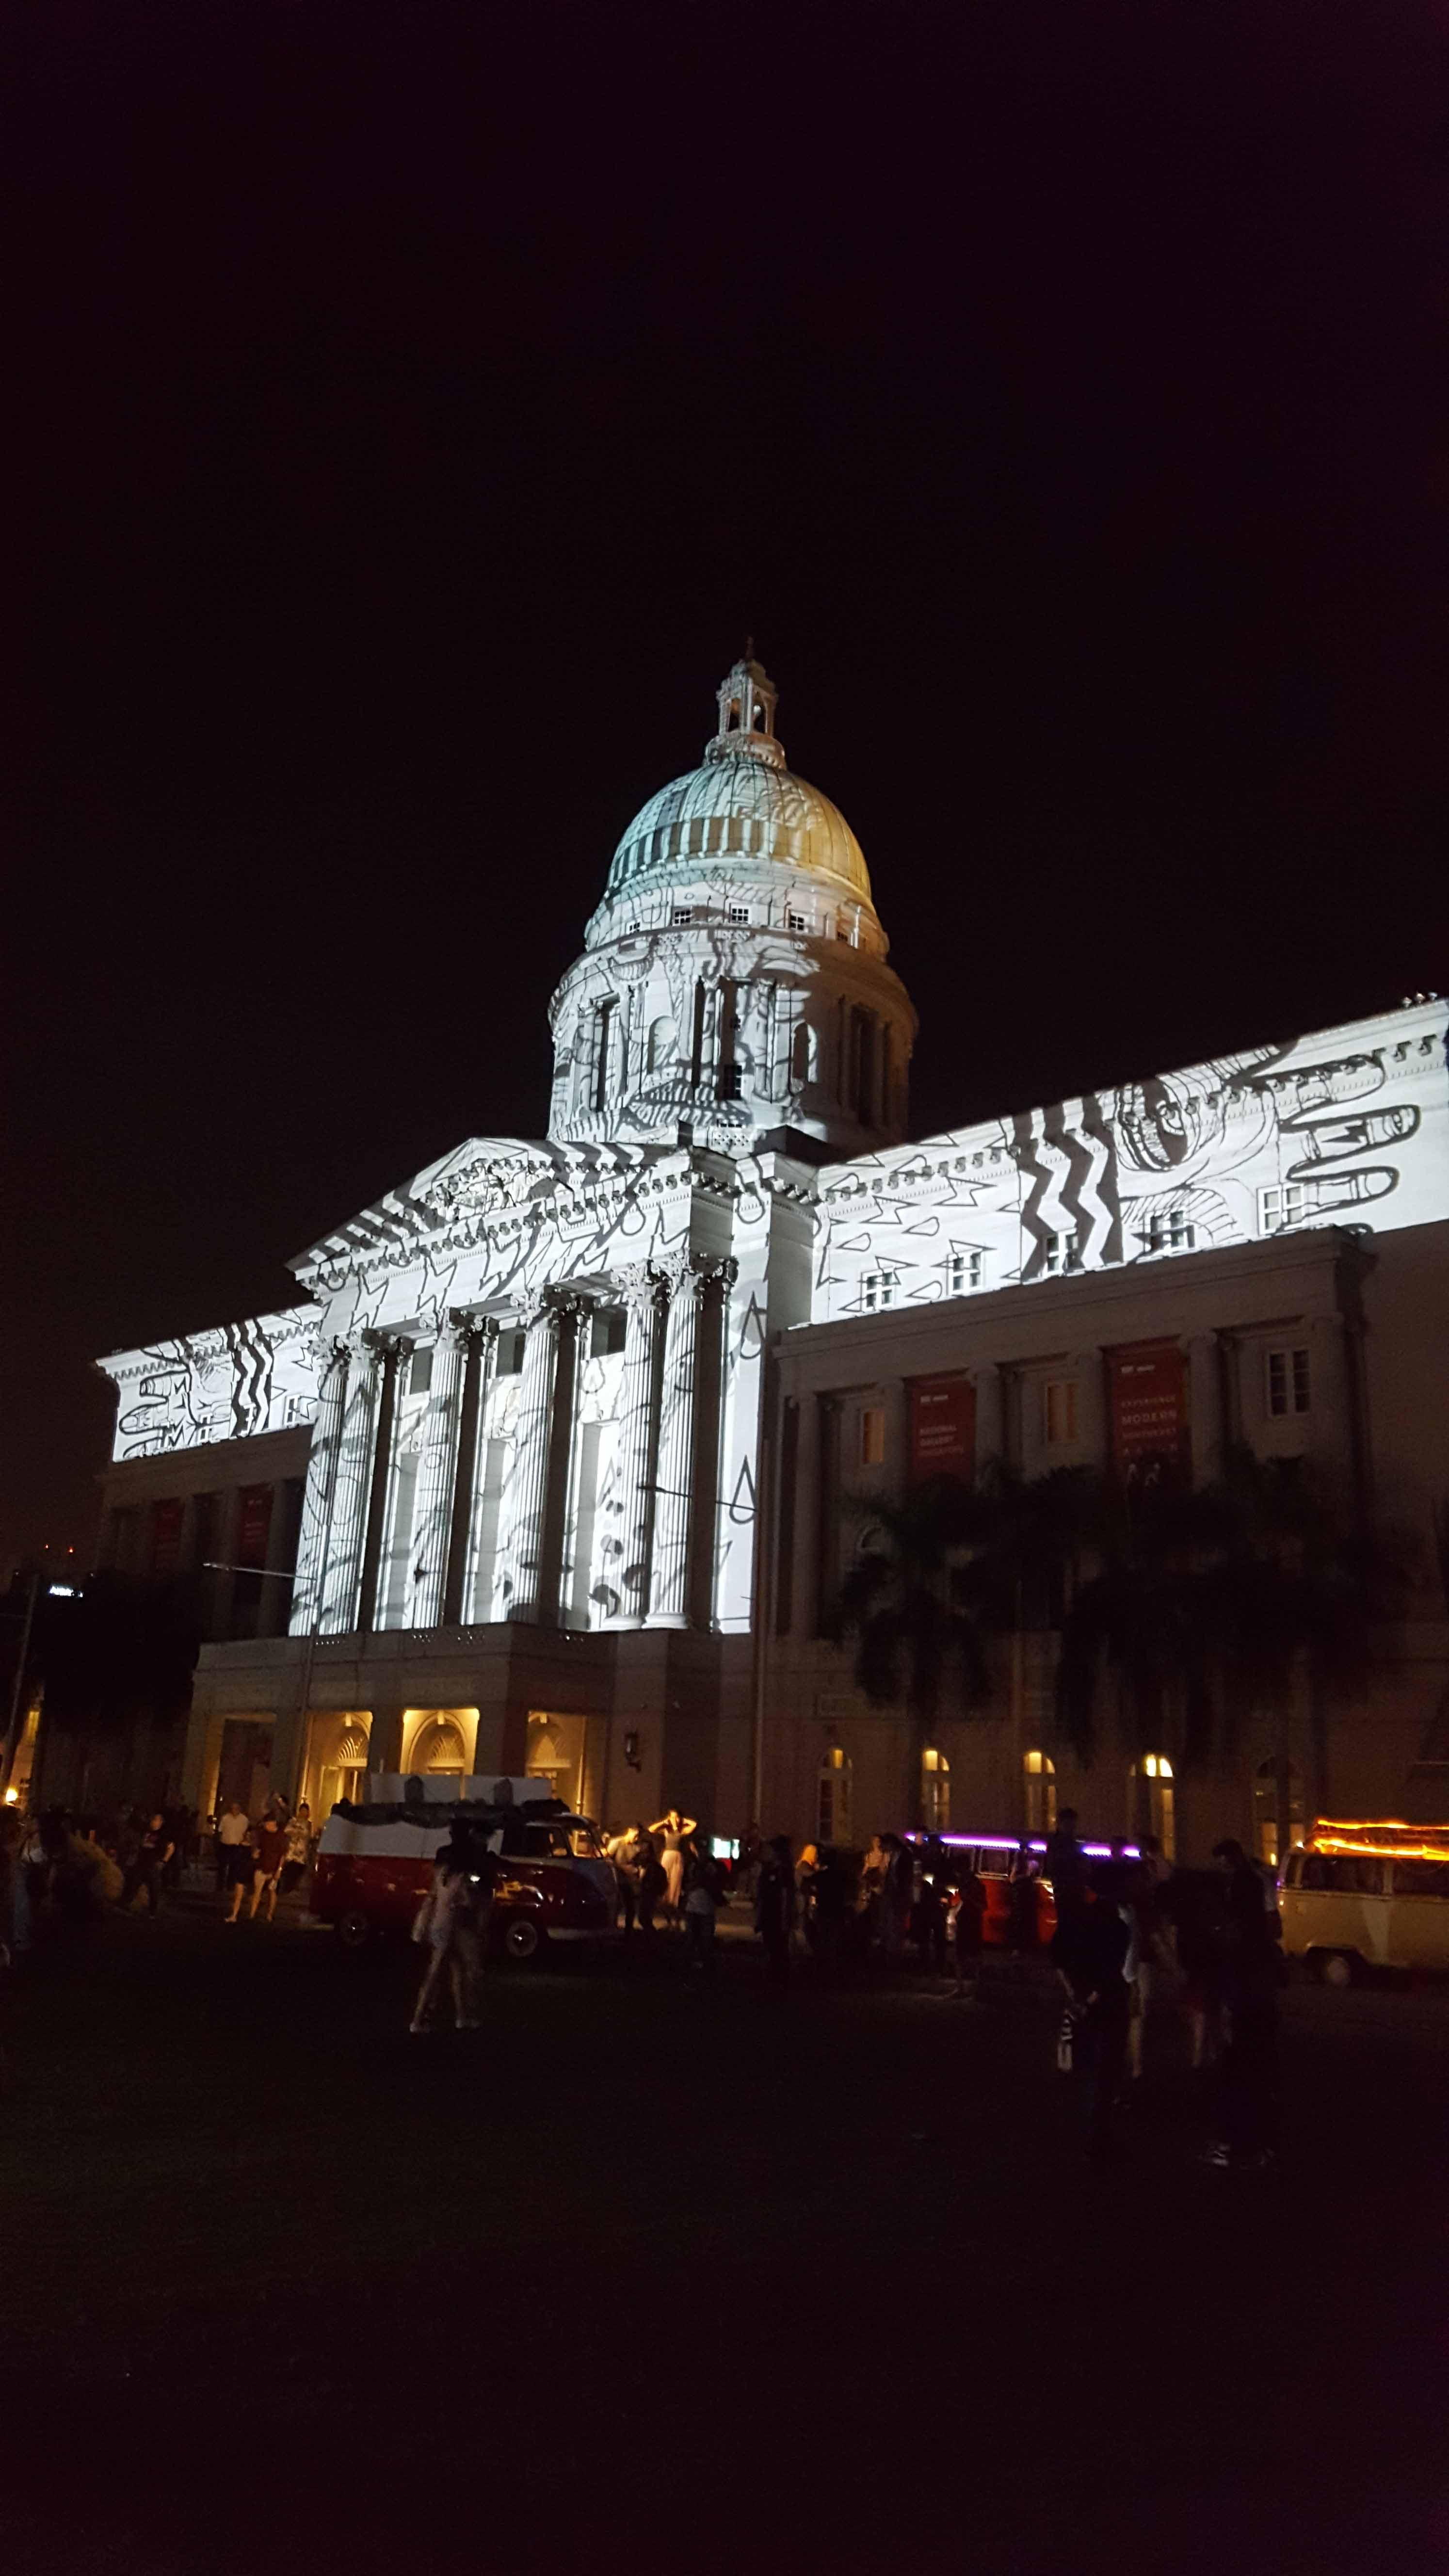 Light to Night Festival at National Gallery Singapore 